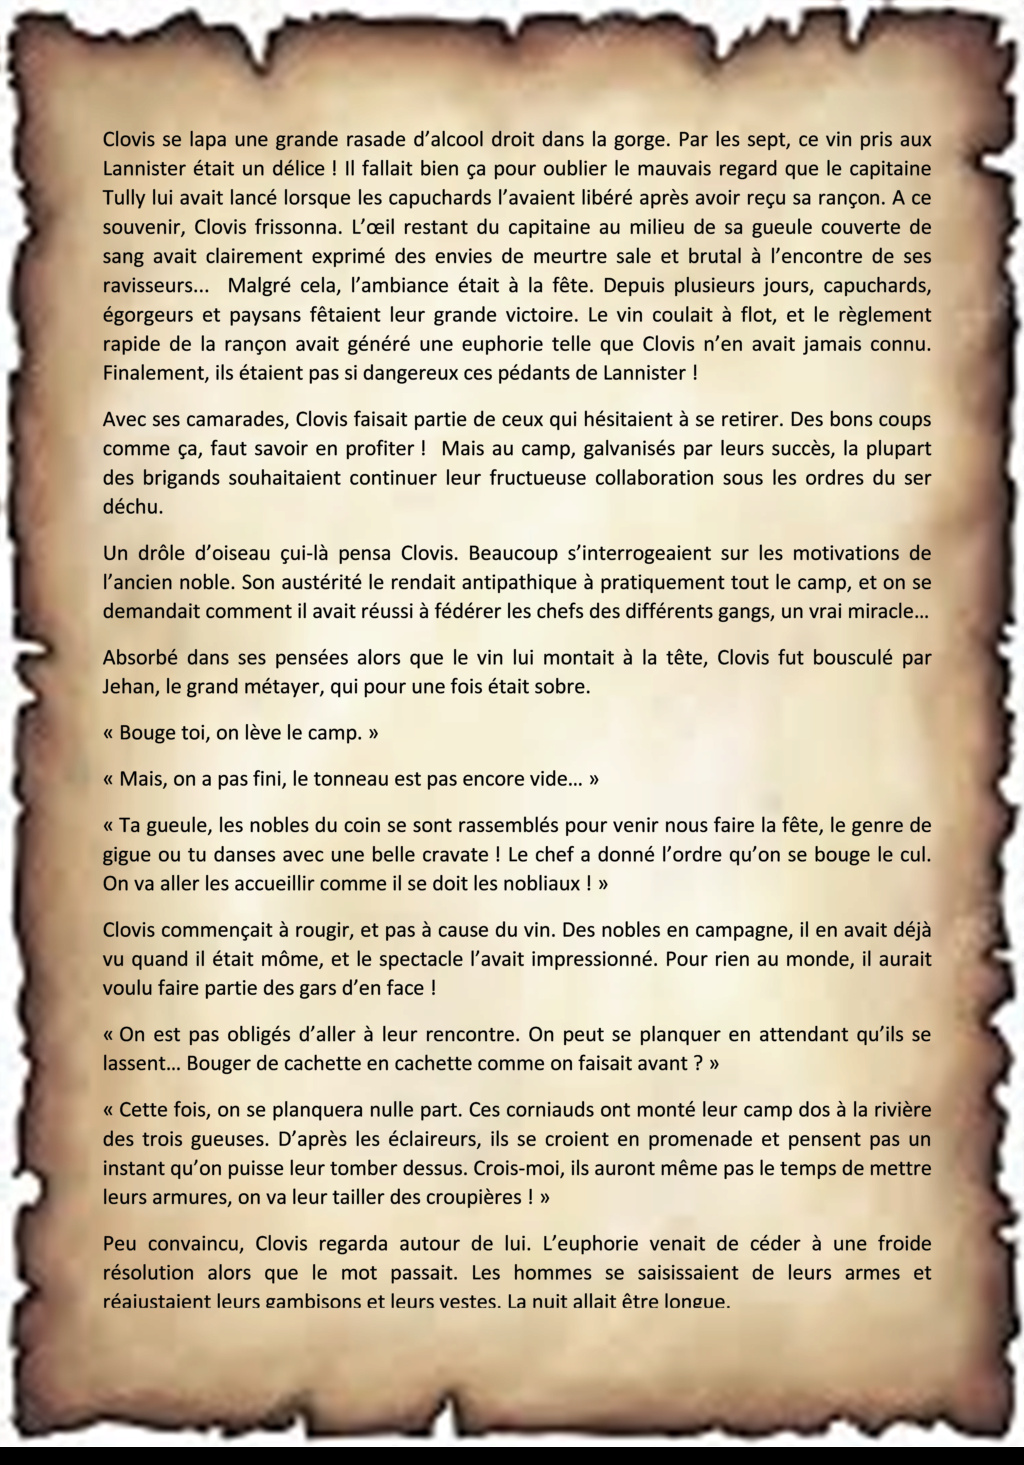 texte10.png